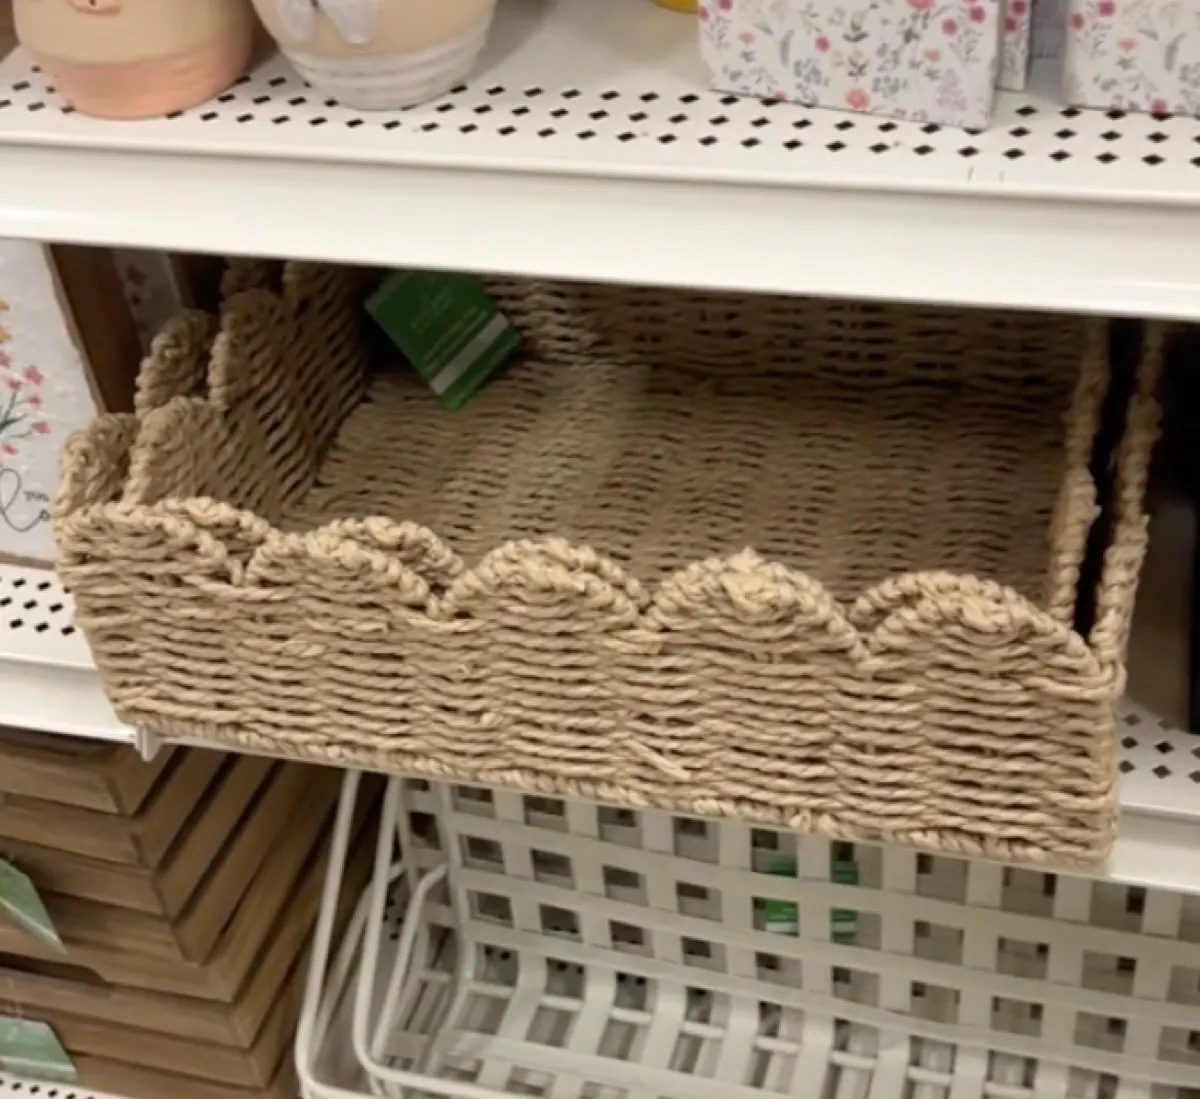 Scalloped rattan tray from Michaels on shelf